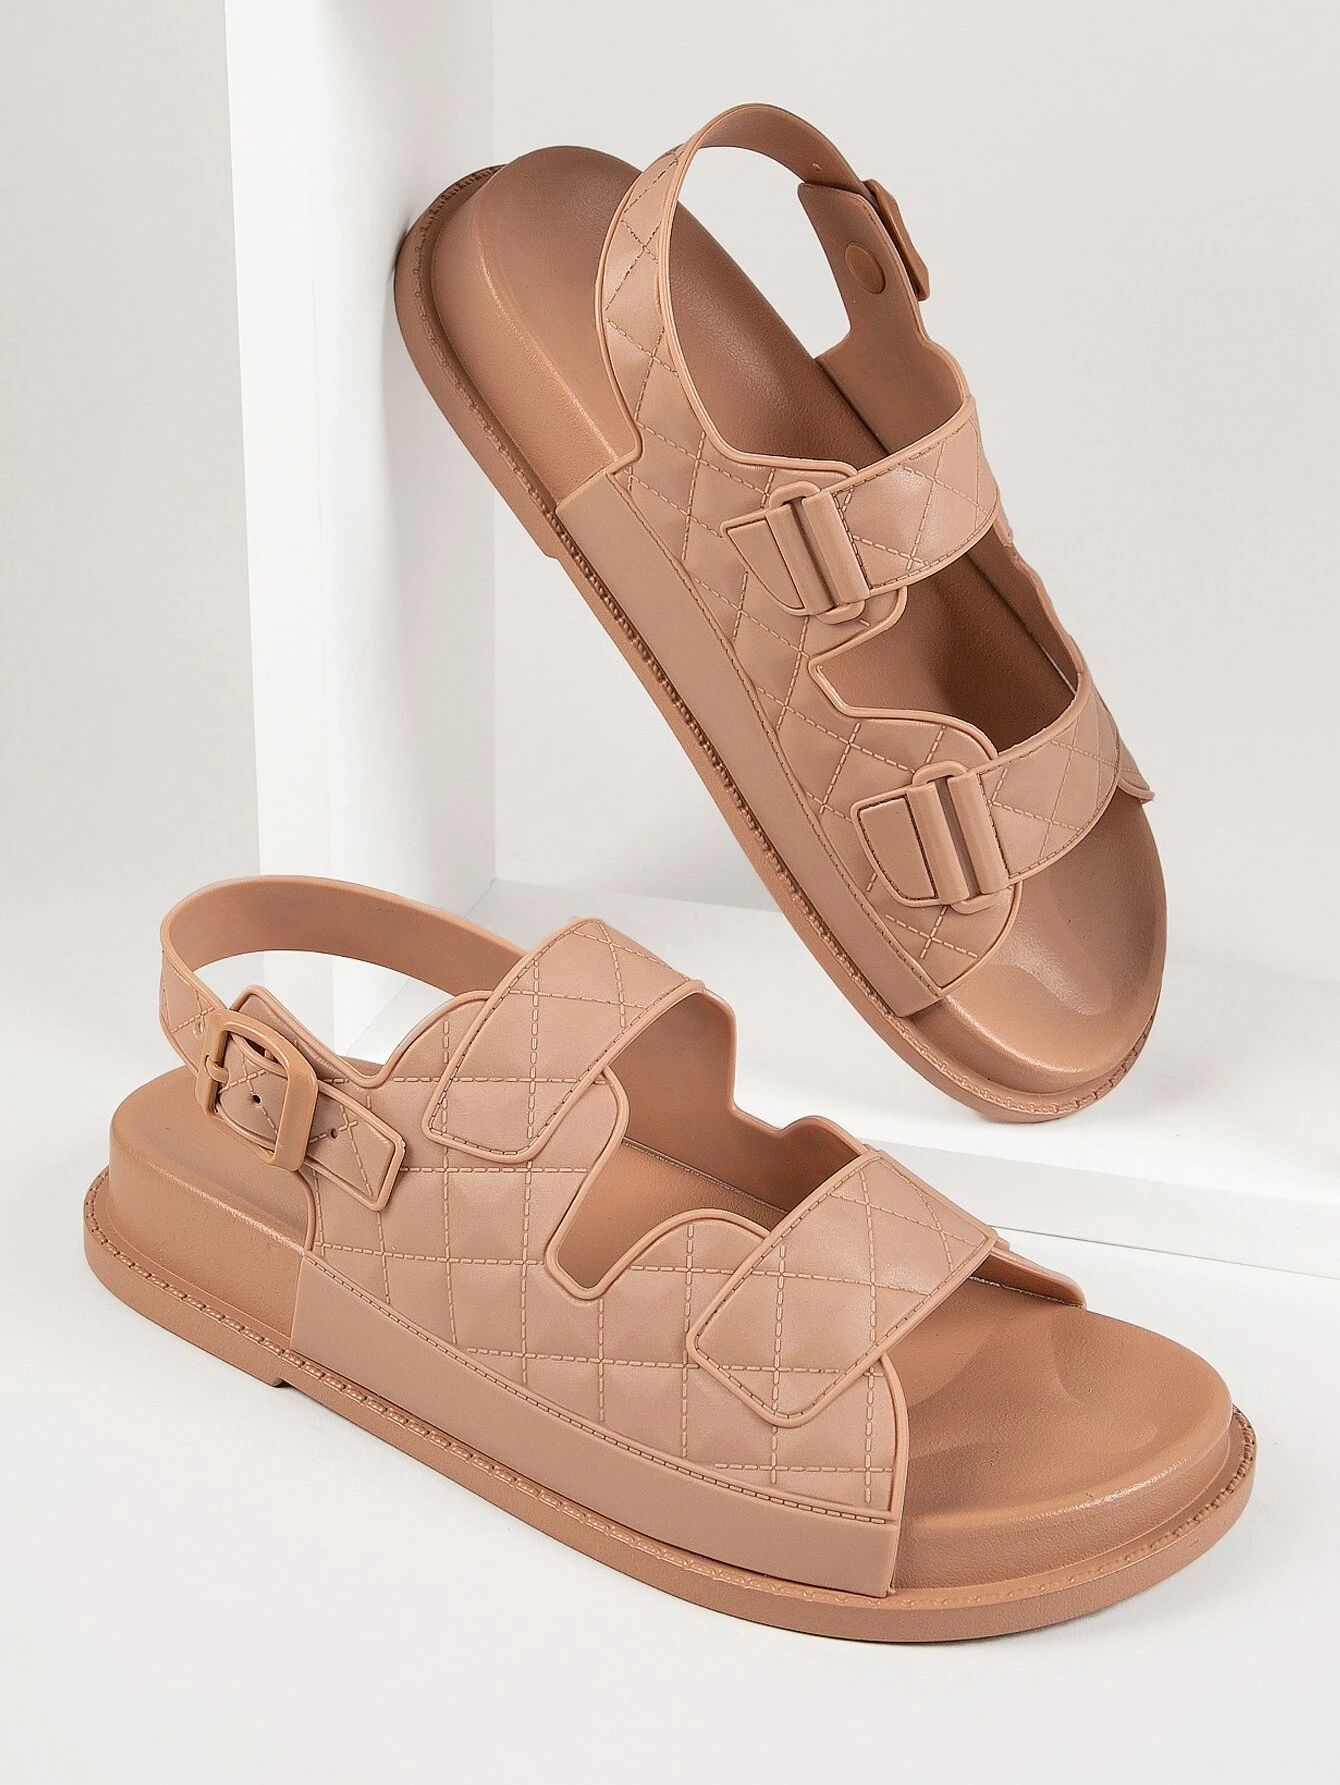 Footbed Almond Toe Buckled Slingback Sandals | SHEIN